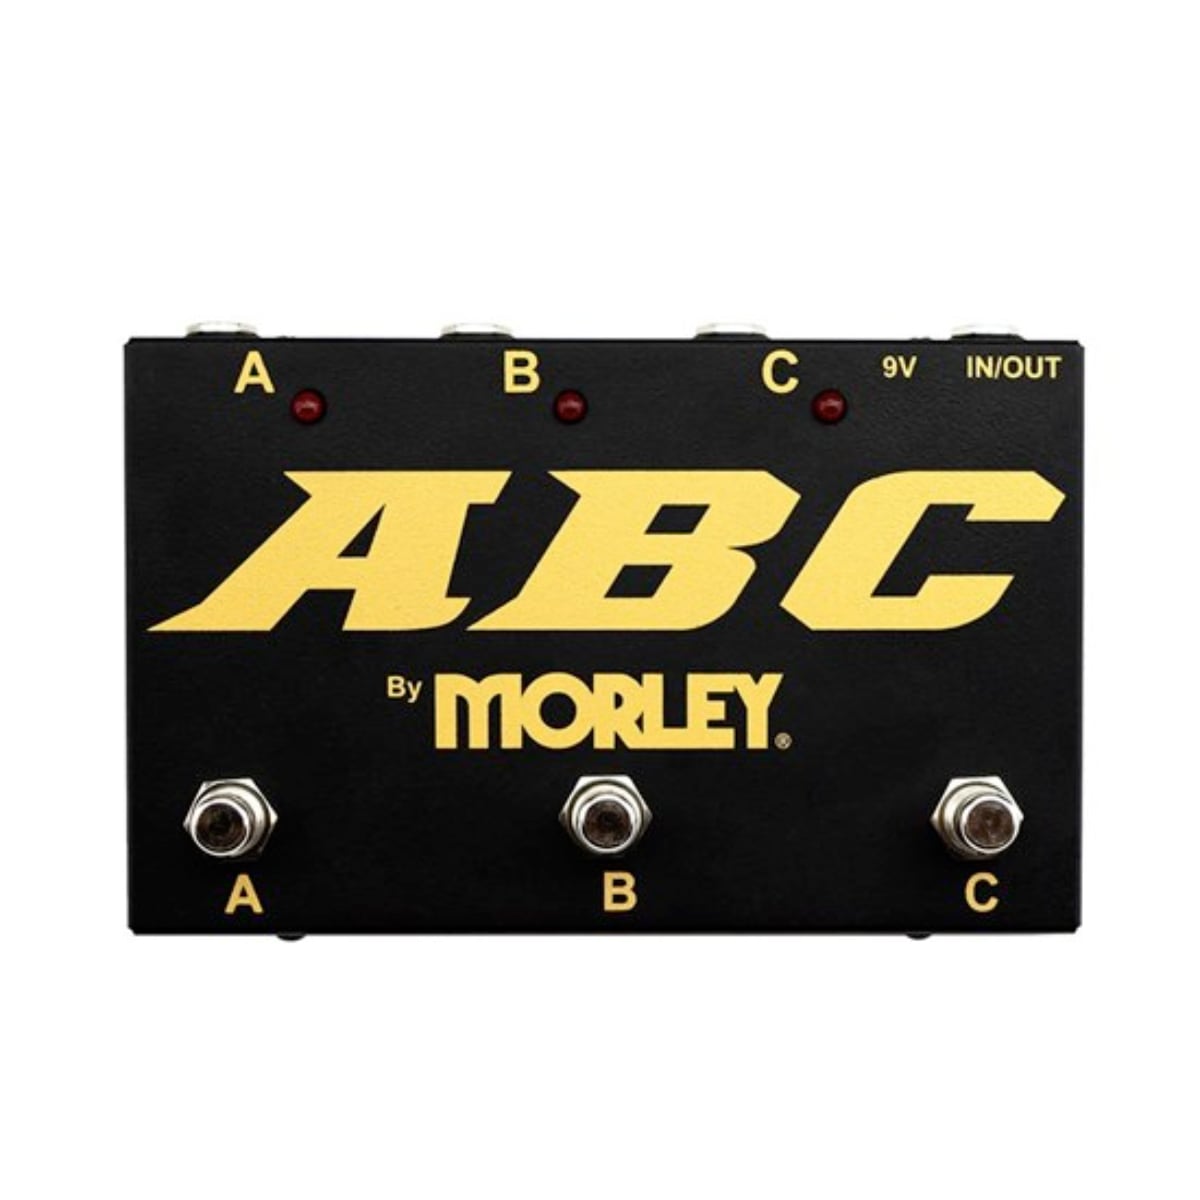 Morley Abc Gold Series Selector/Combiner